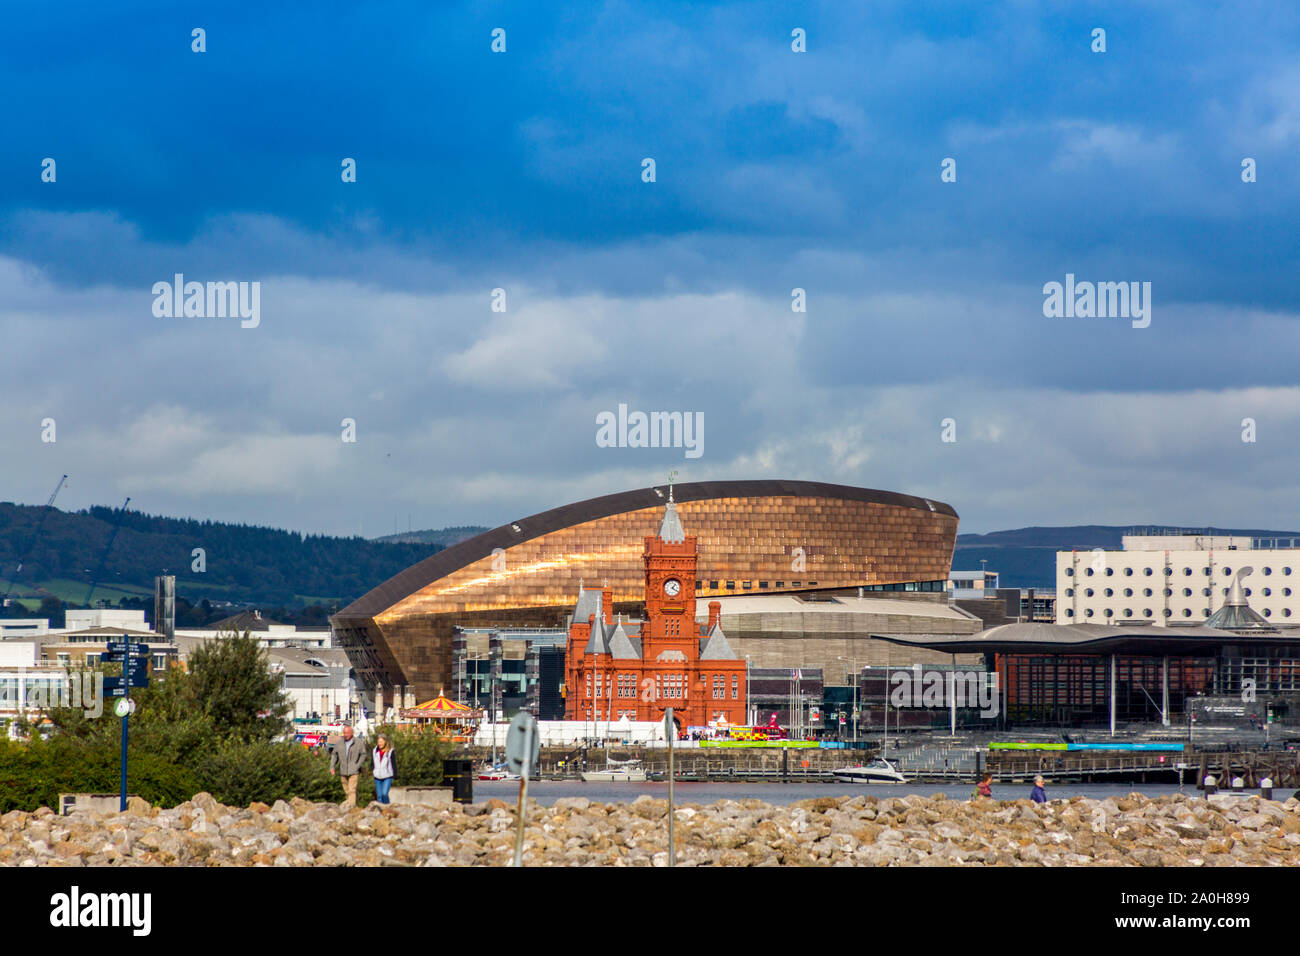 A shaft of sunlight lights up the Millennium Centre and red brick Pierhead Building on Cardiff Bay's iconic waterfront, Glamorgan, Wales, UK Stock Photo